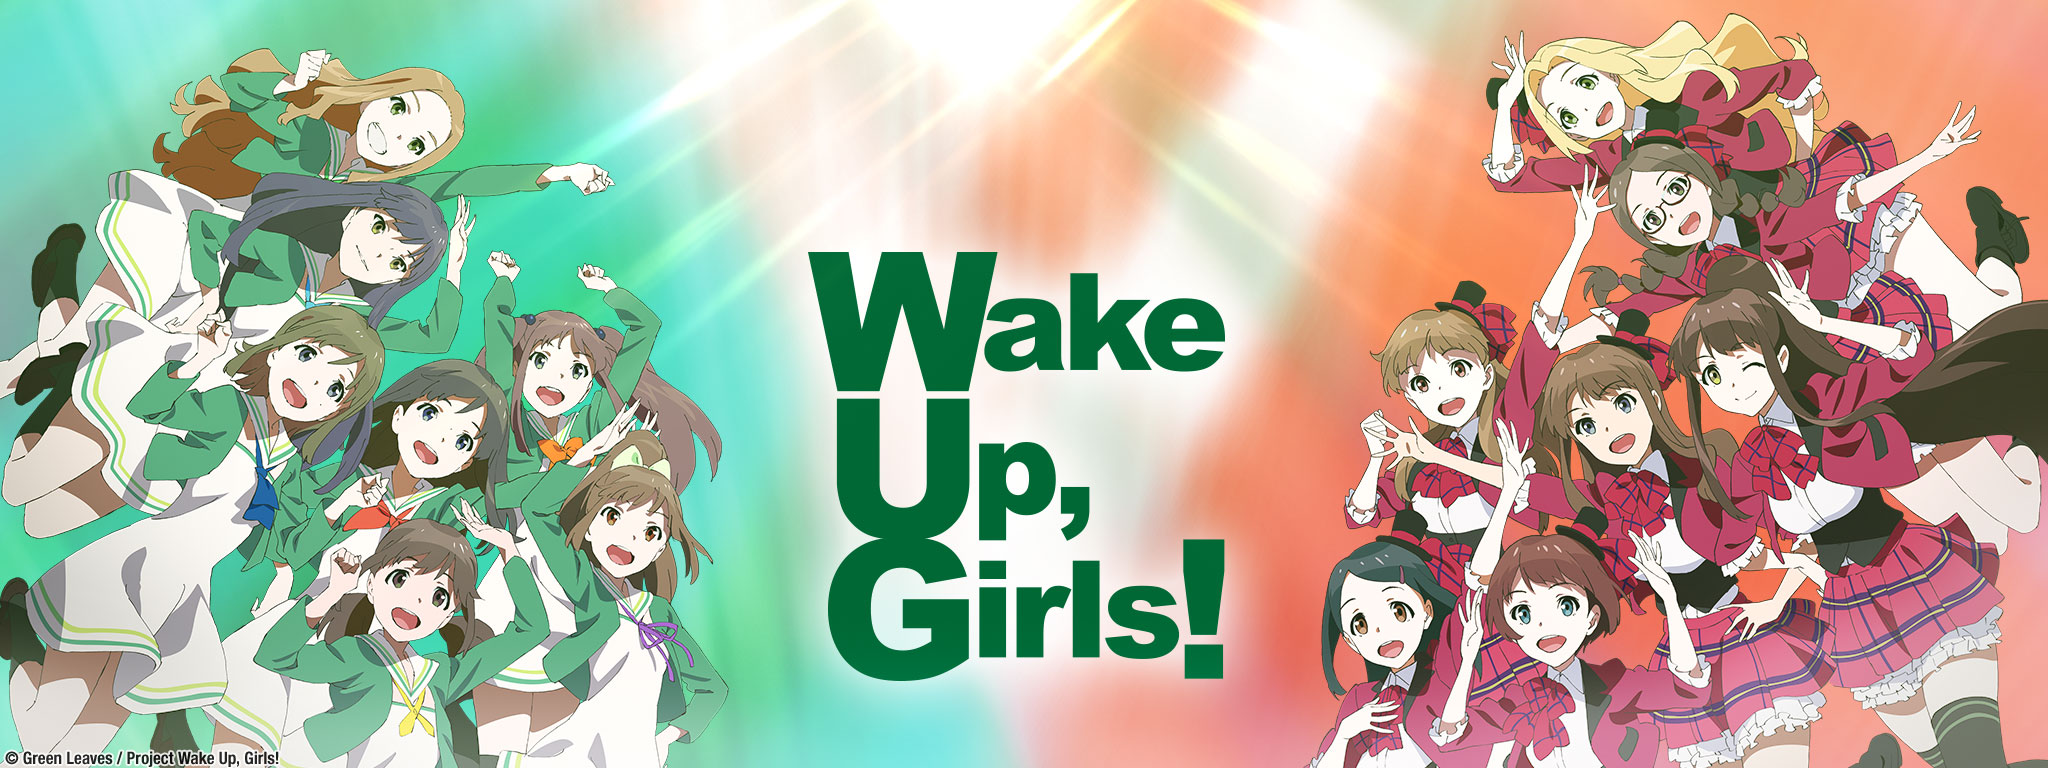 Title Art for Wake Up, Girls!